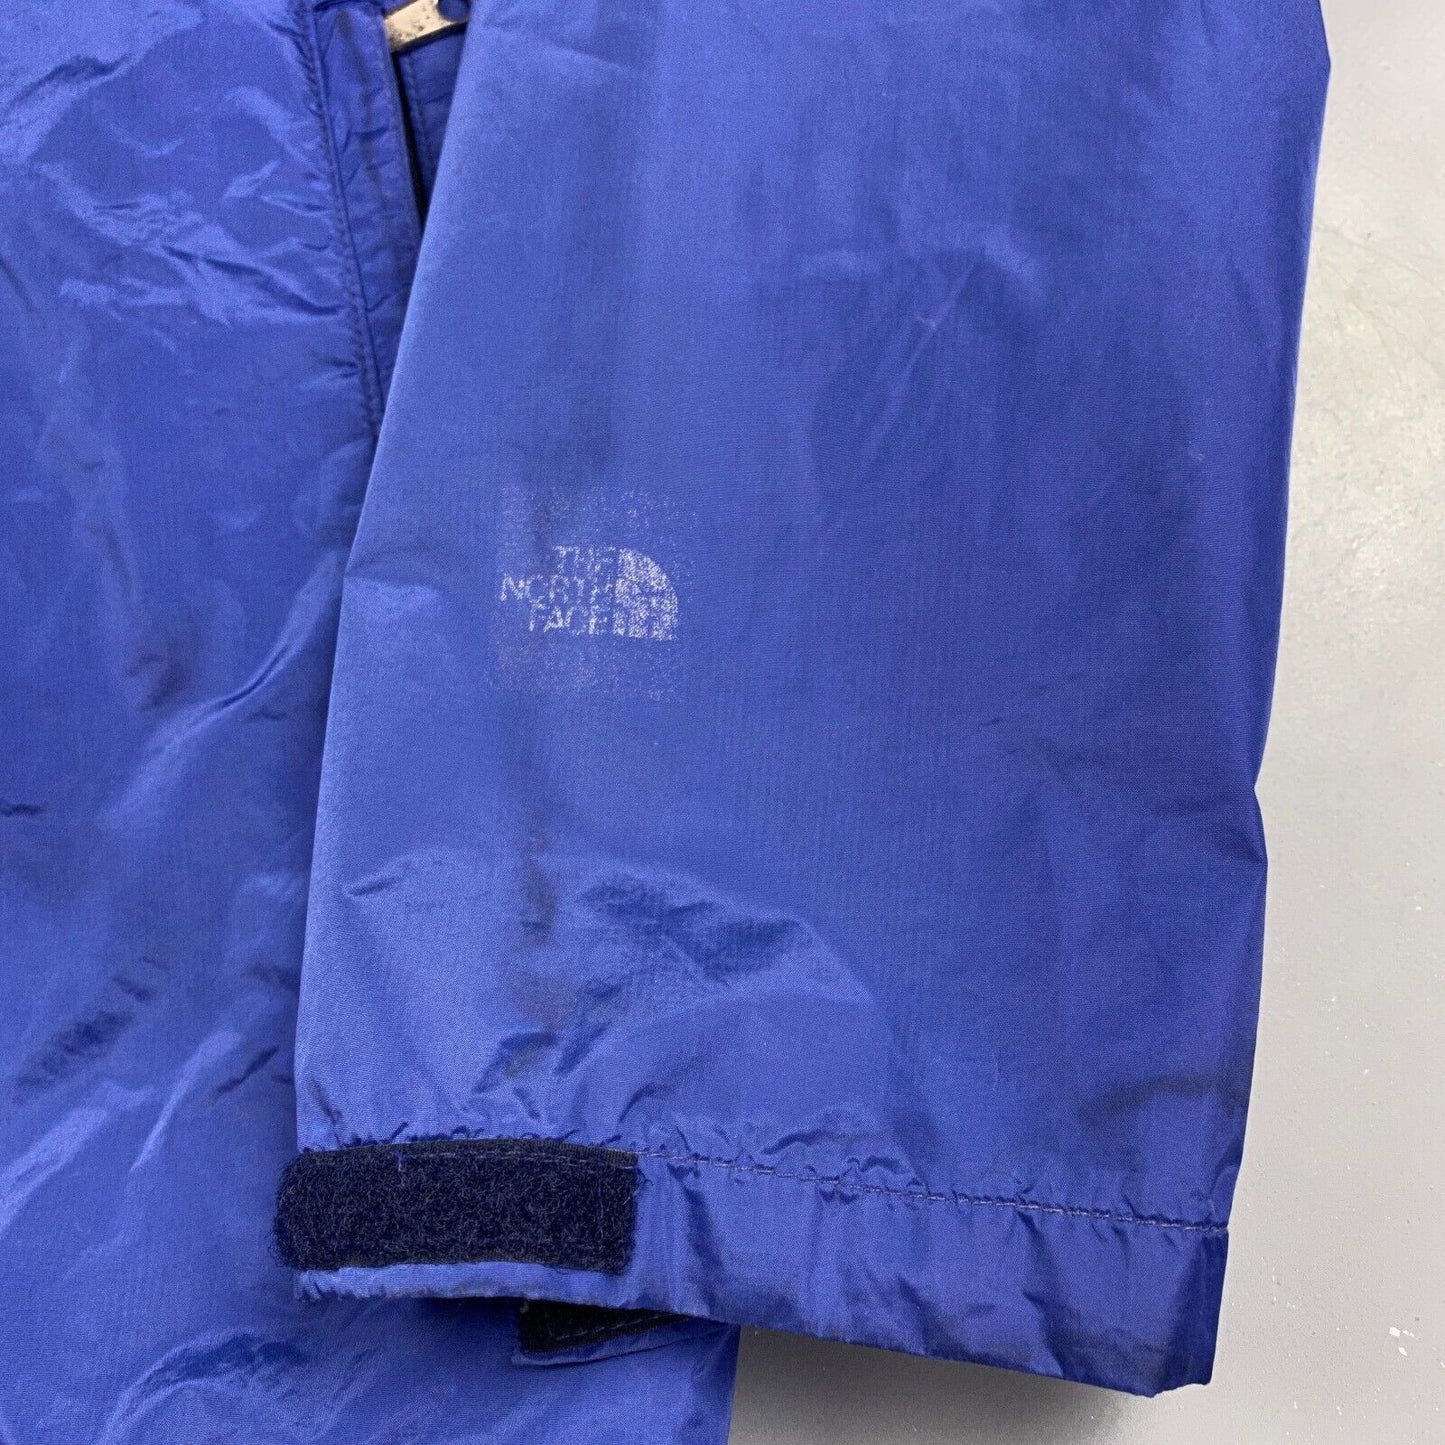 VINTAGE 90s The North Face Blue Gore-tex Windbreaker Jacket sz Large Adult